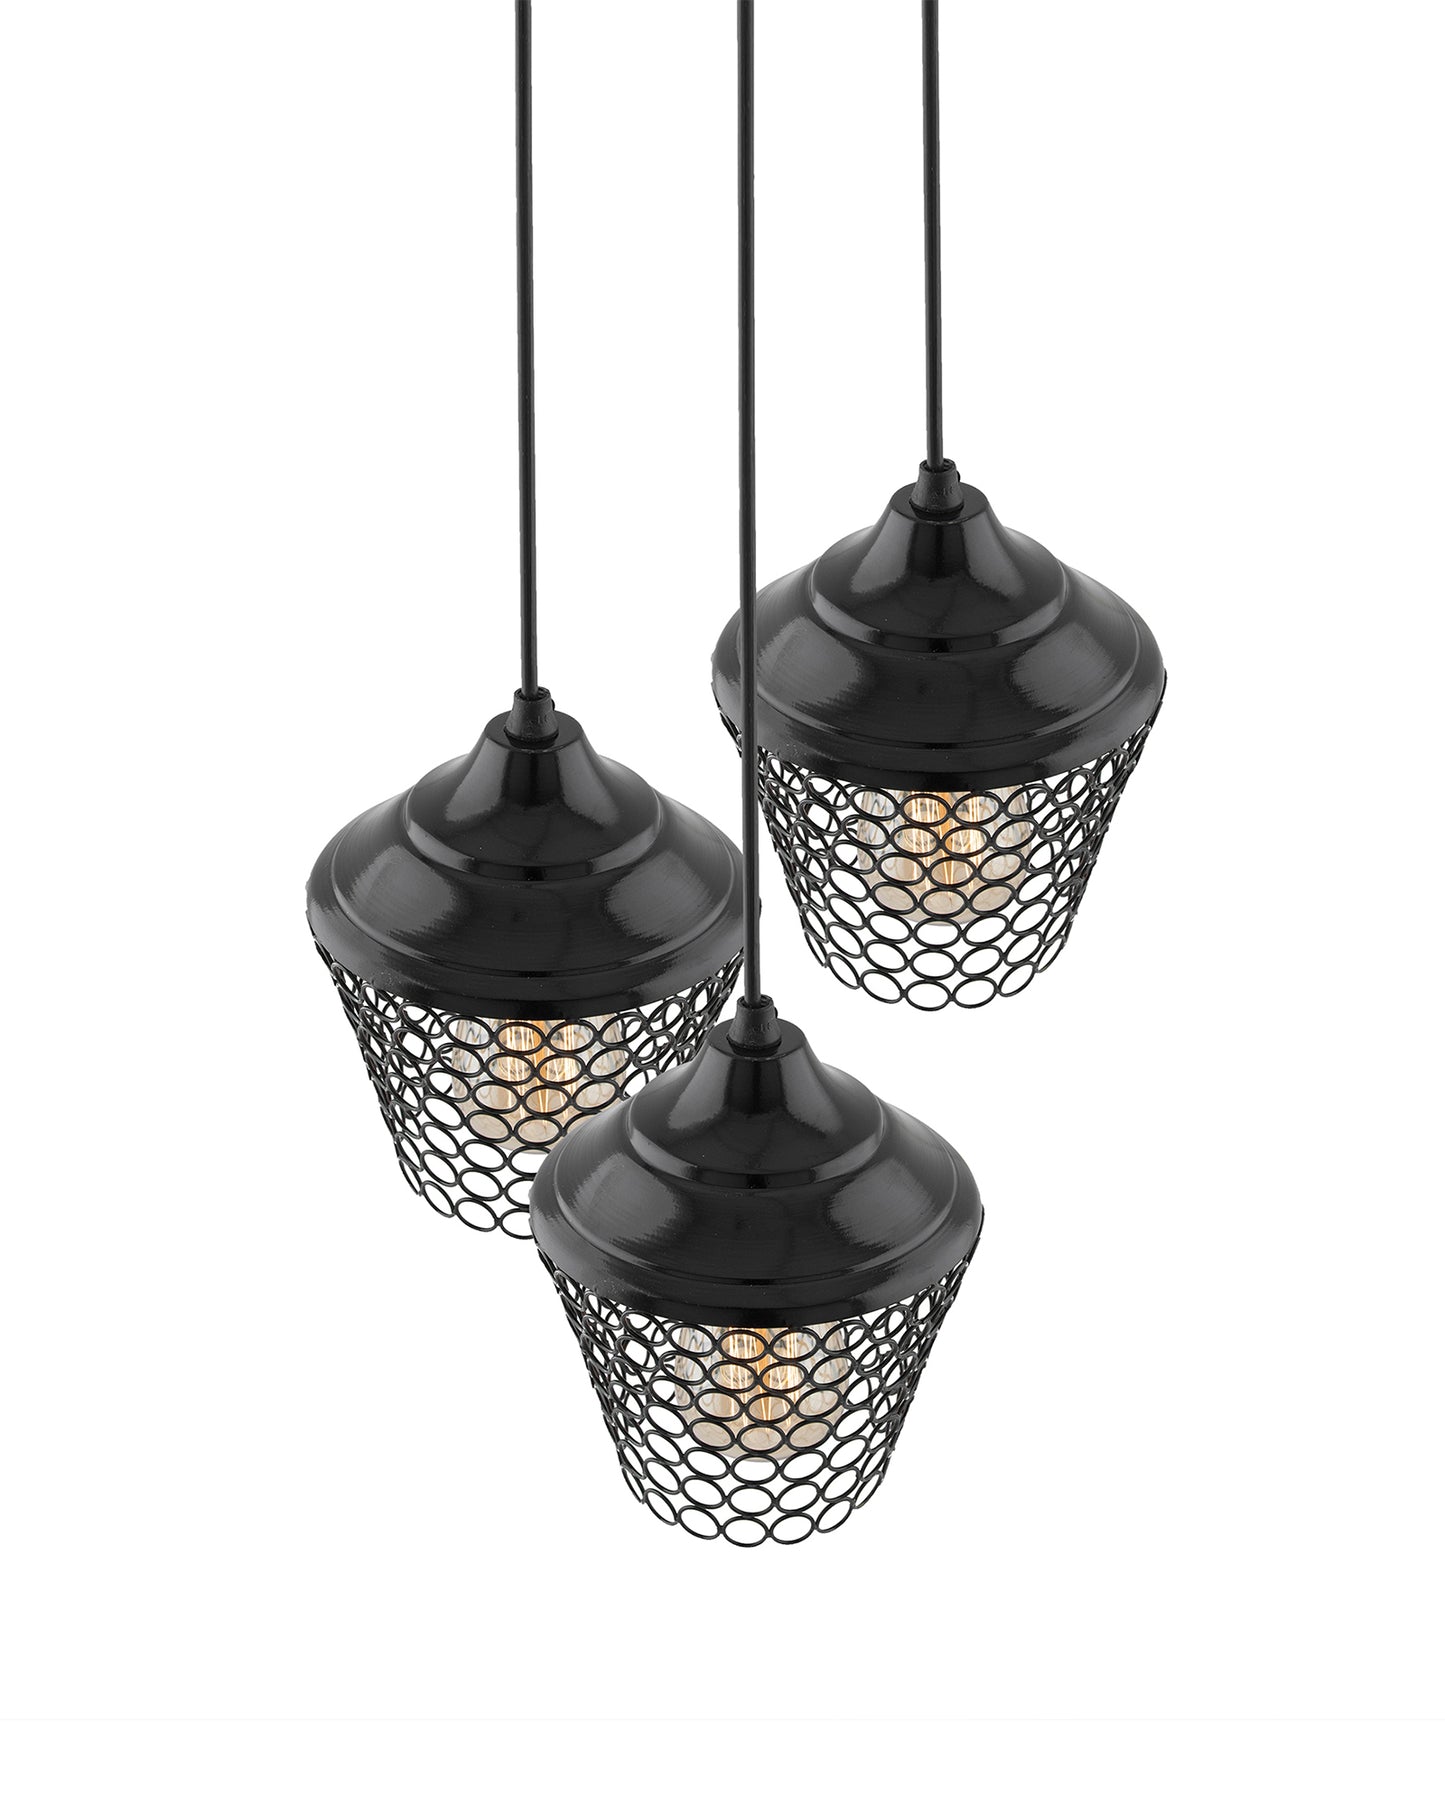 3-lights Round Cluster Chandelier crystal lantern Hanging Pendant Light with Braided Cord